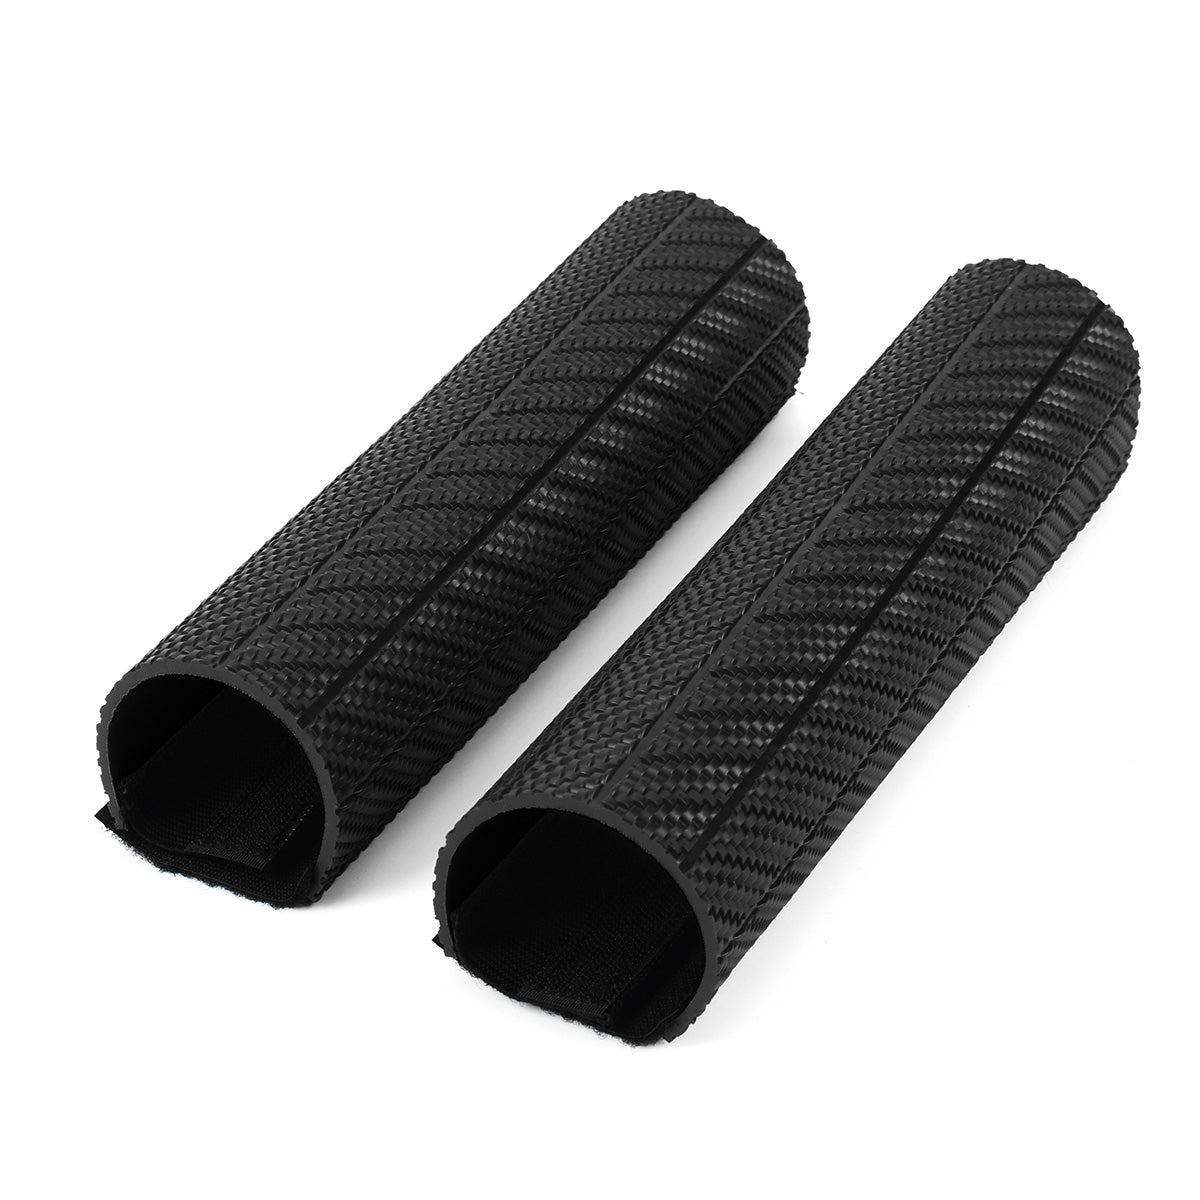 Dark Slate Gray Motorcycle Front Fork Protector Shock Absorber Guard Wrap Cover Skin